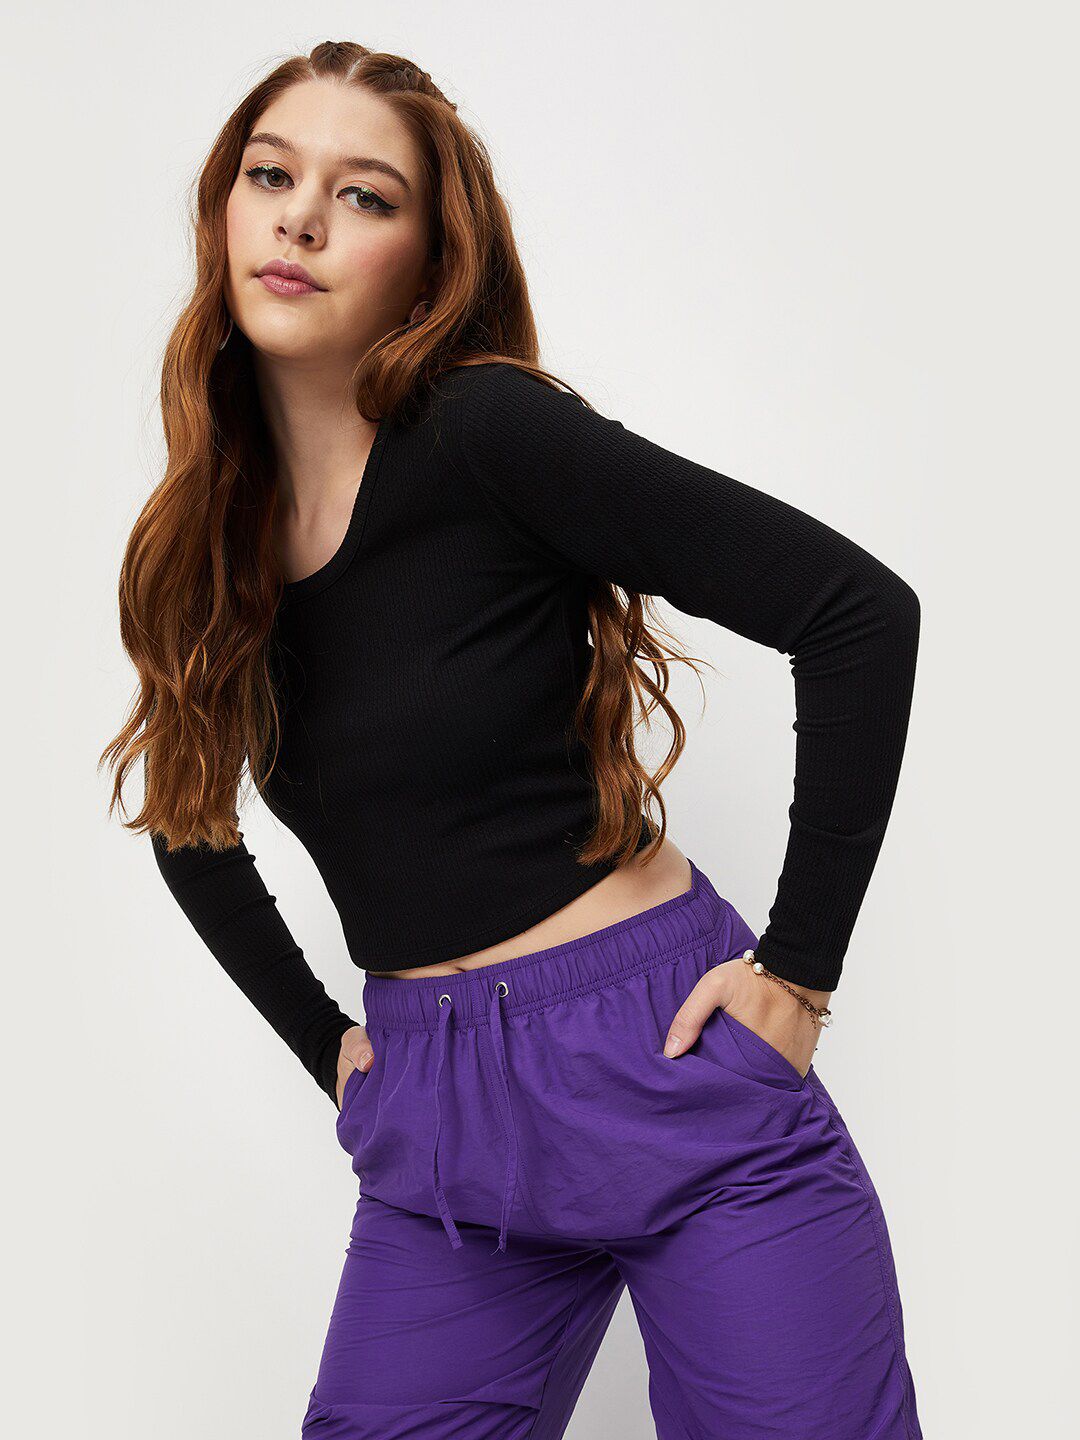 max Long Sleeves Fitted Crop Top Price in India